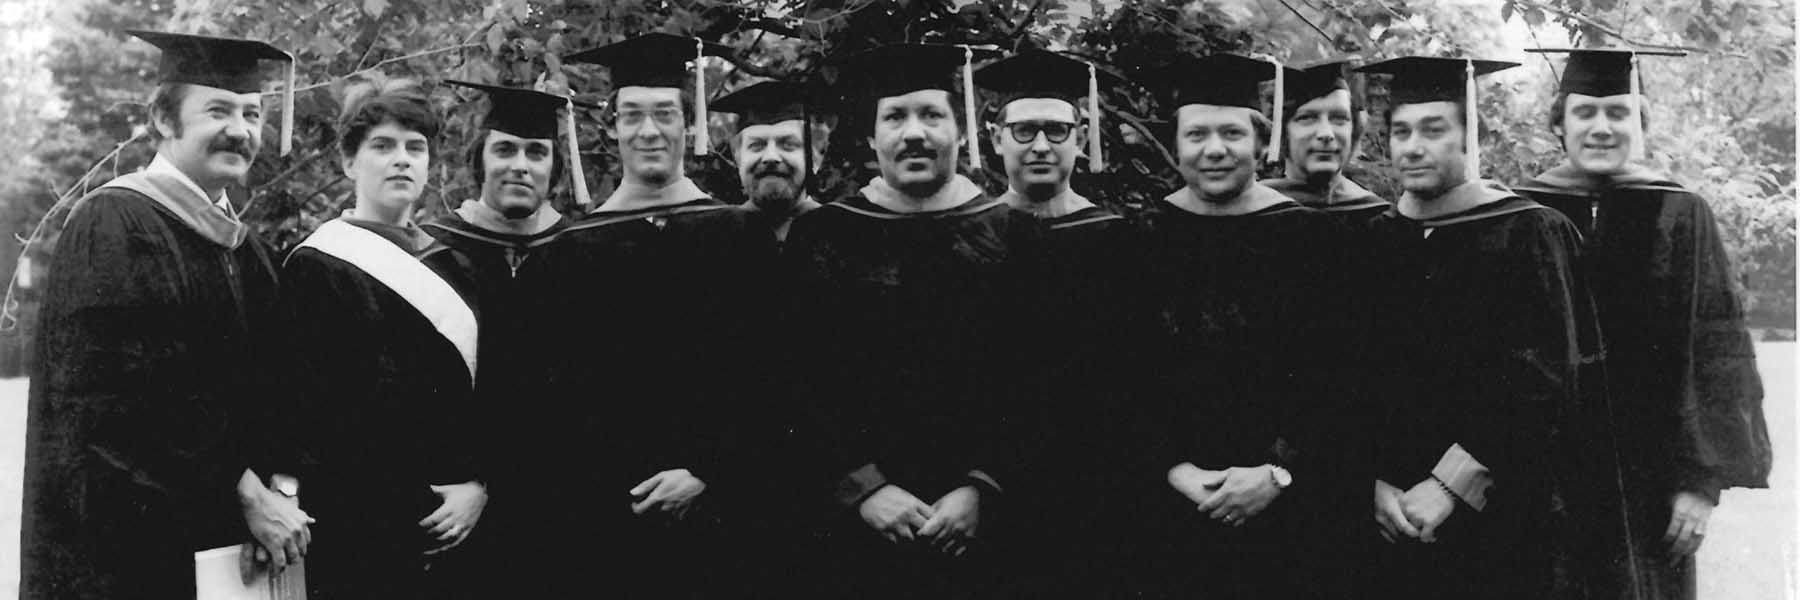 A vintage black and white photo of the school's first grads, with first Dean Bonser to the far left.